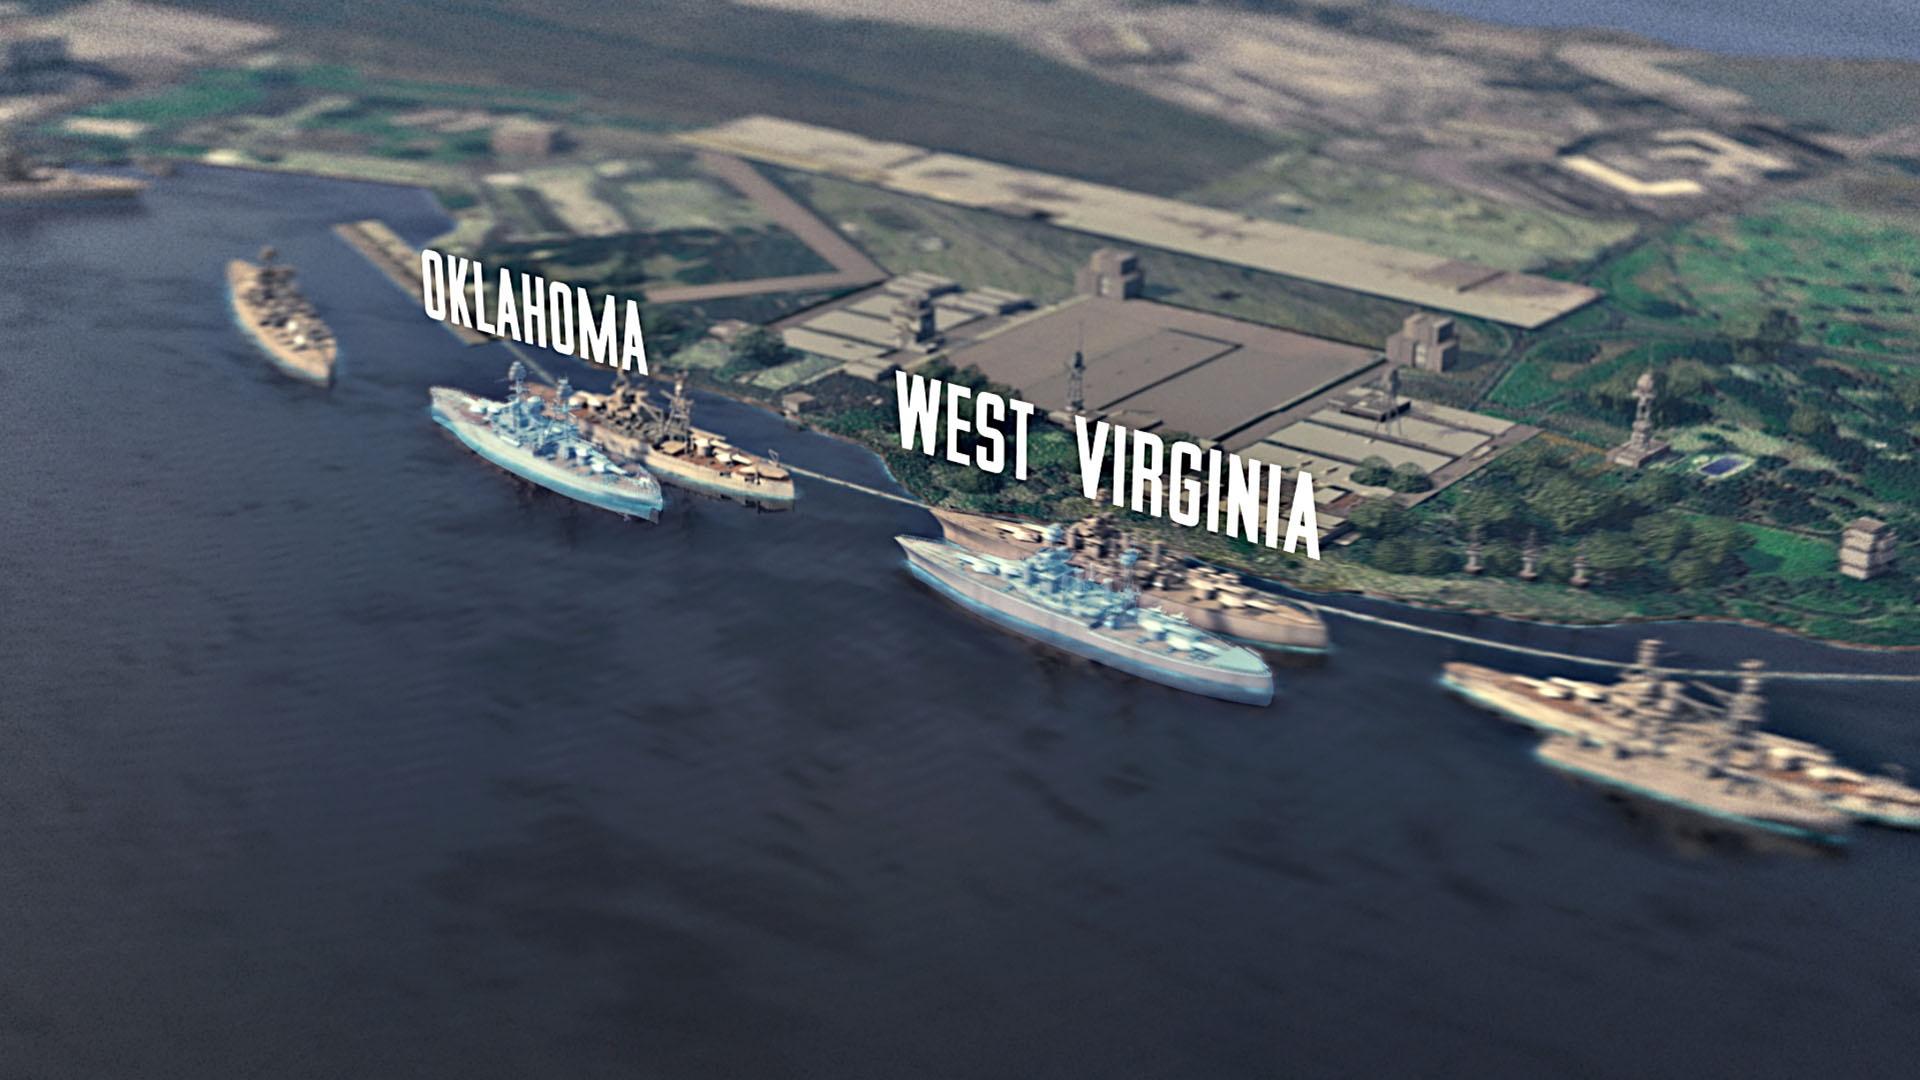 Animation showing the location of the USS Oklahoma and USS West Virginia battleships.